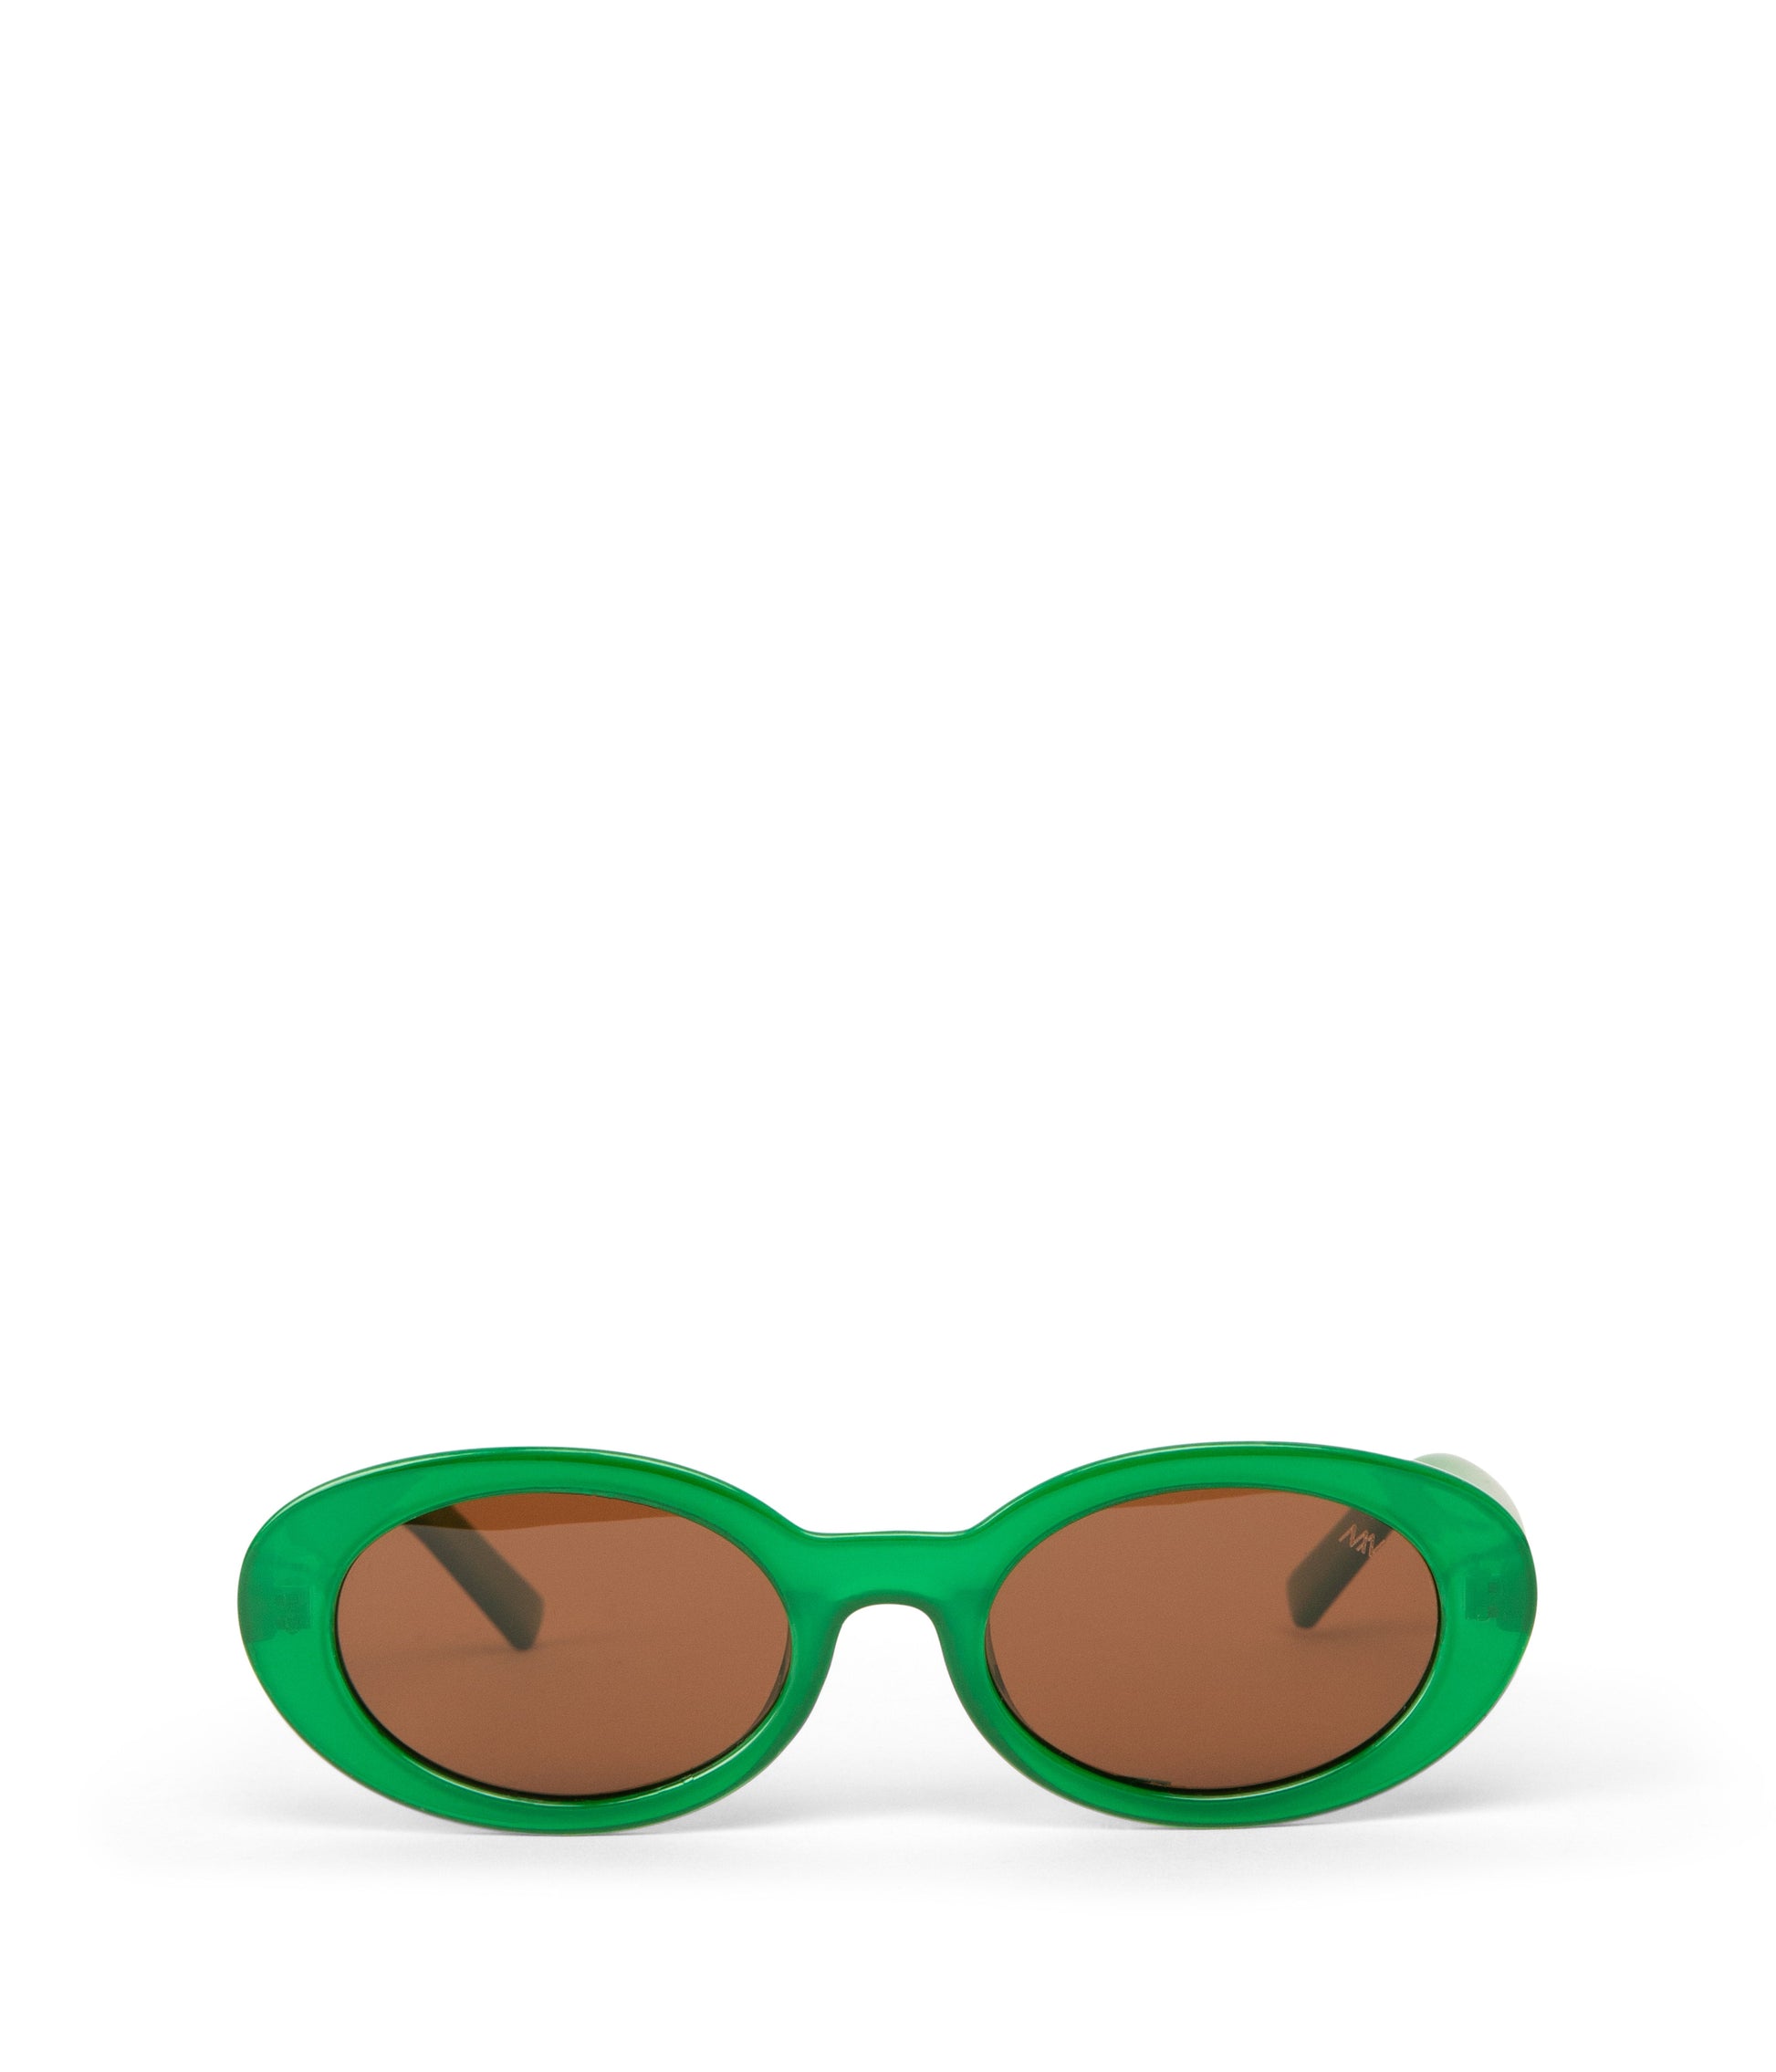 MIELA-2 Recycled Oval Sunglasses | Color: Green, Brown - variant::green